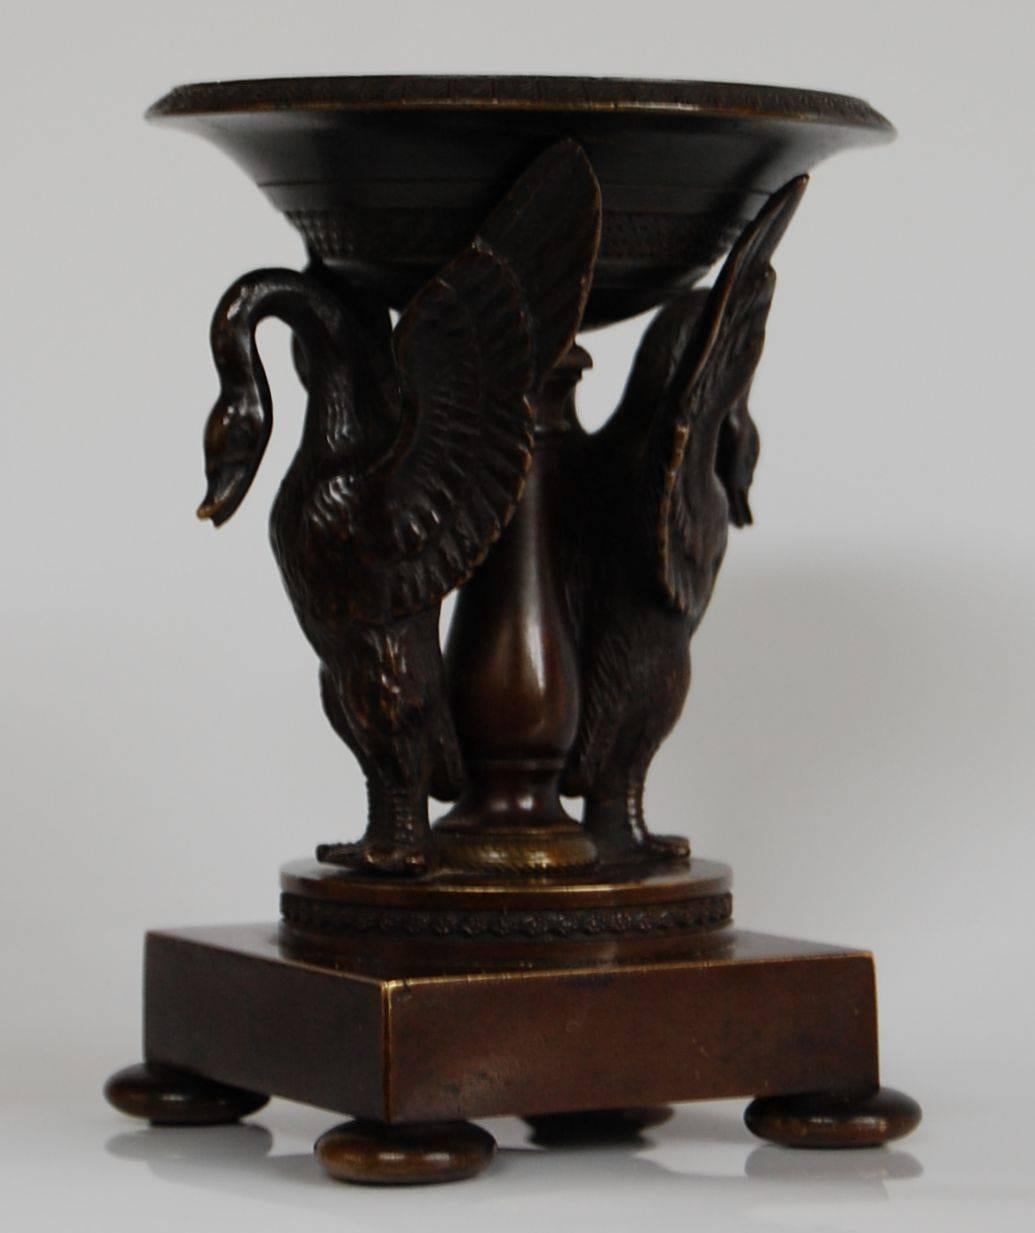 Bronze incense burner supported by two Herons on a raised square base with bun feet. Very fine etchings in excellent condition.